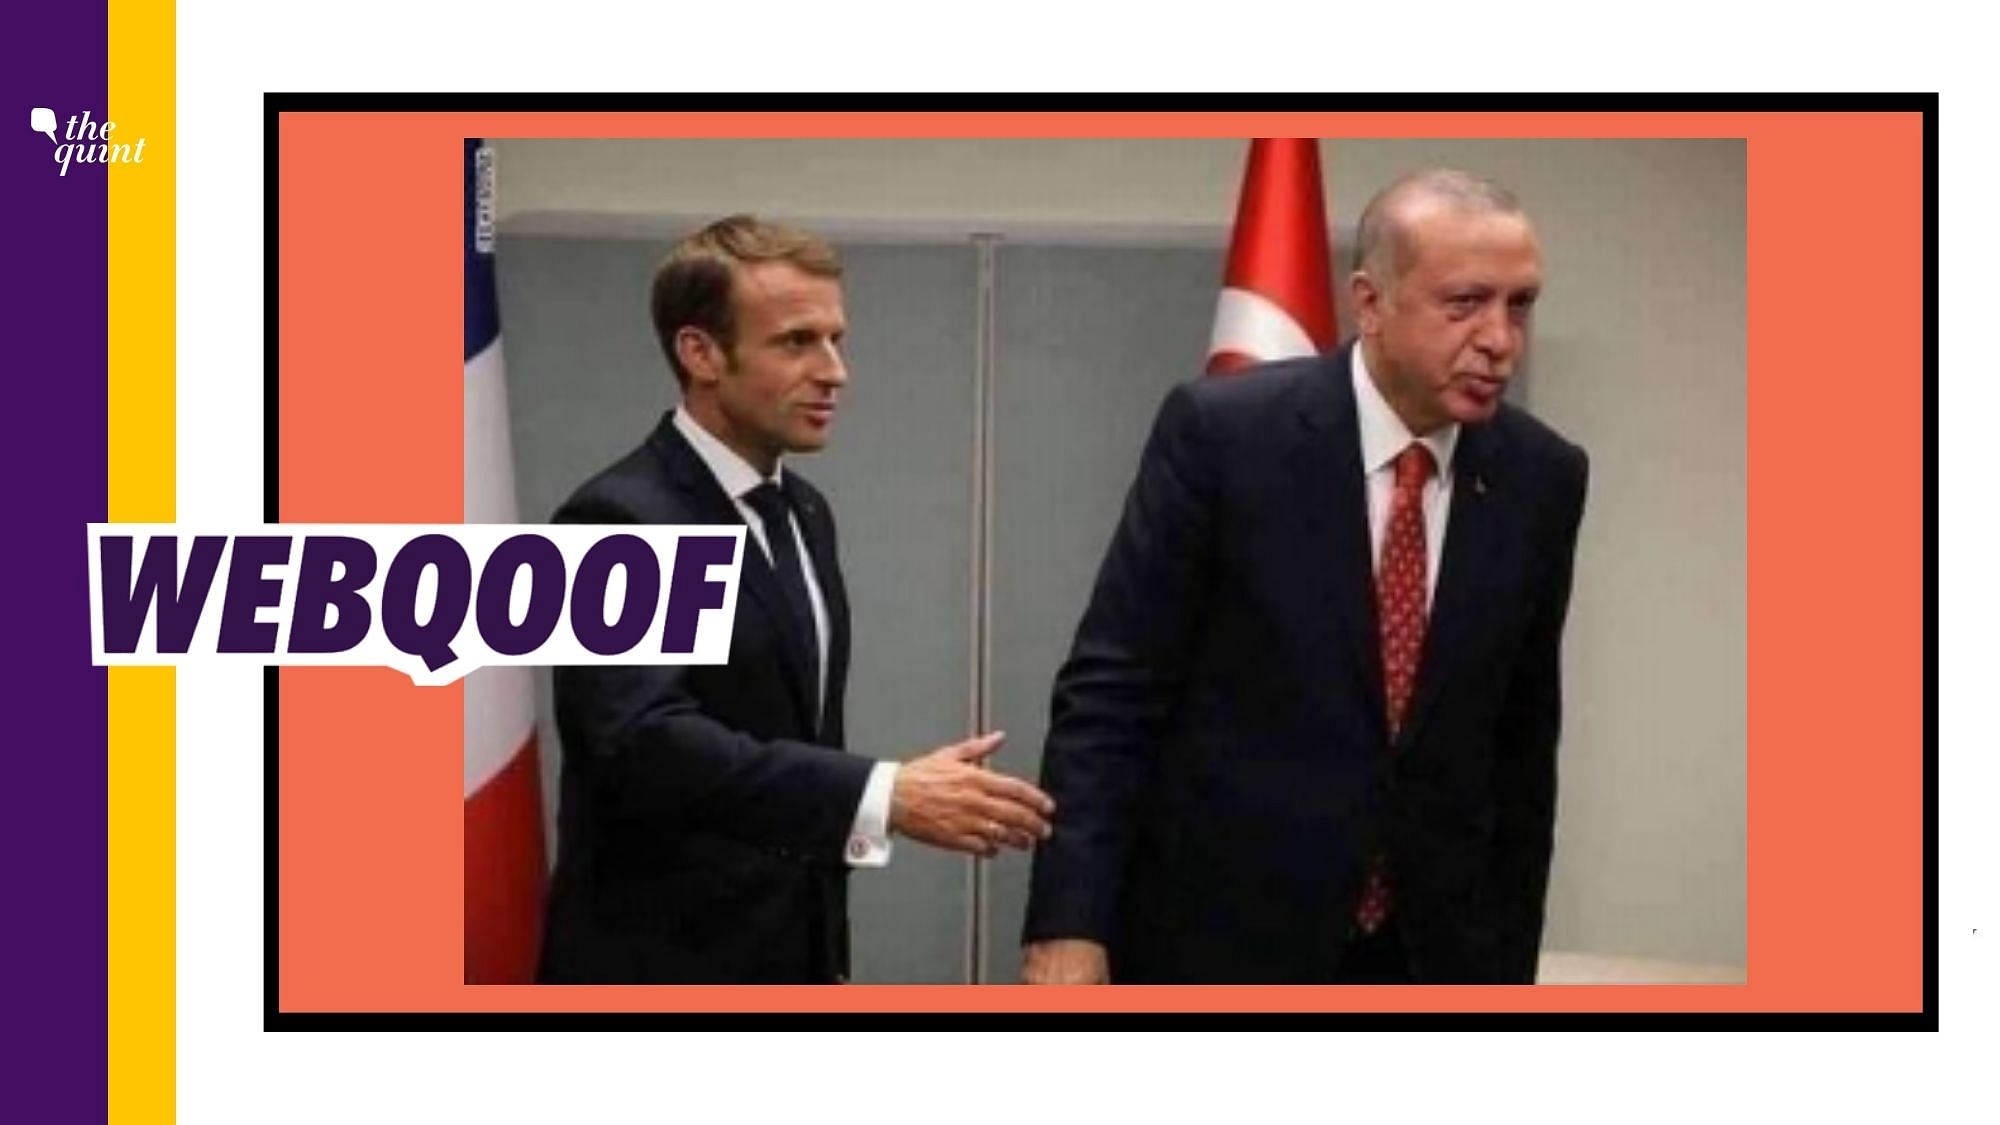 An old image has been revived to falsely claim that Turkish President Recep Tayyip Erdogan and French President Emmanuel Macron did not shake hands with each other.